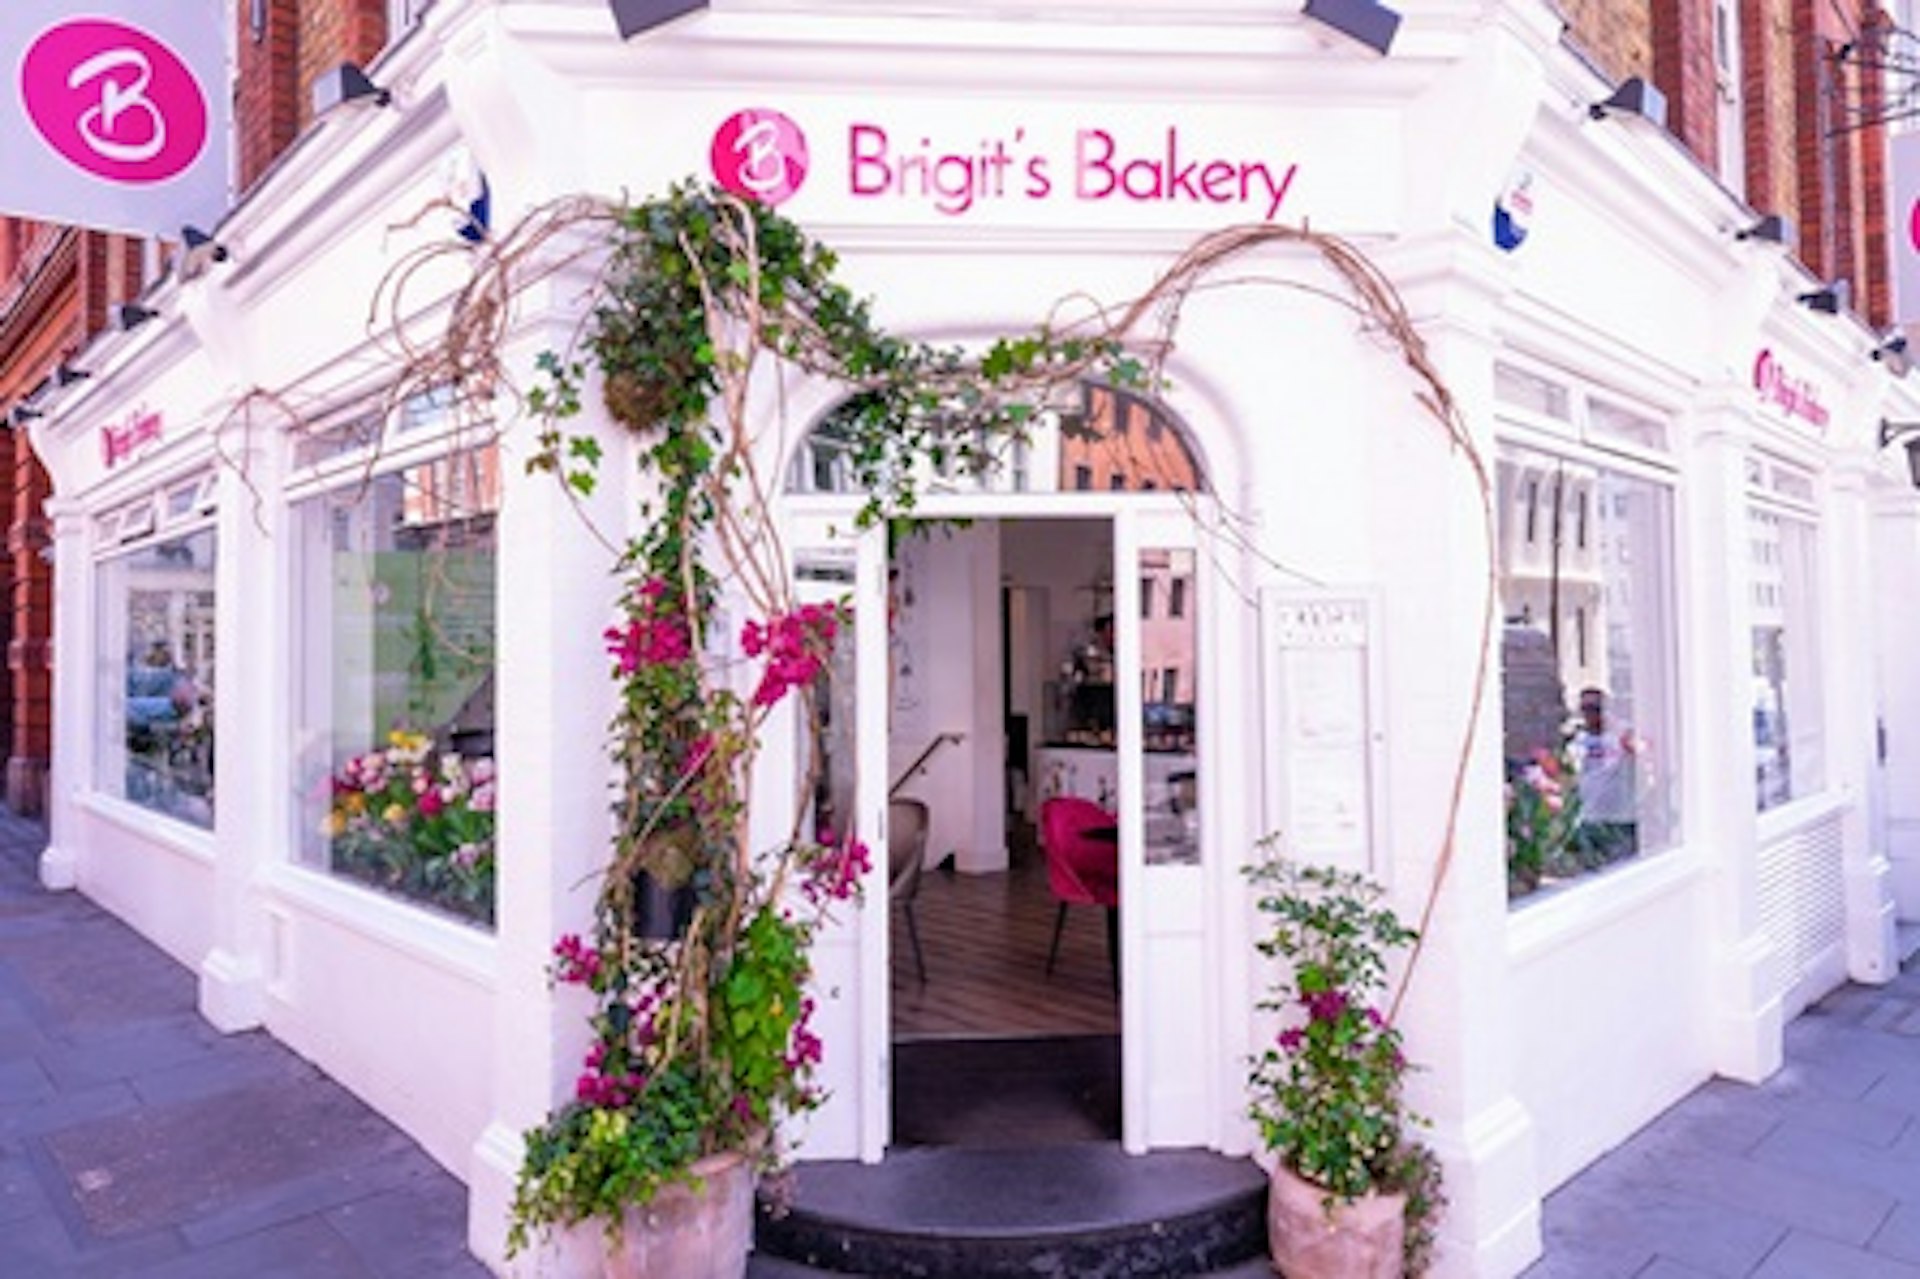 Champagne Afternoon Tea for Two at Brigit's Bakery Covent Garden 2